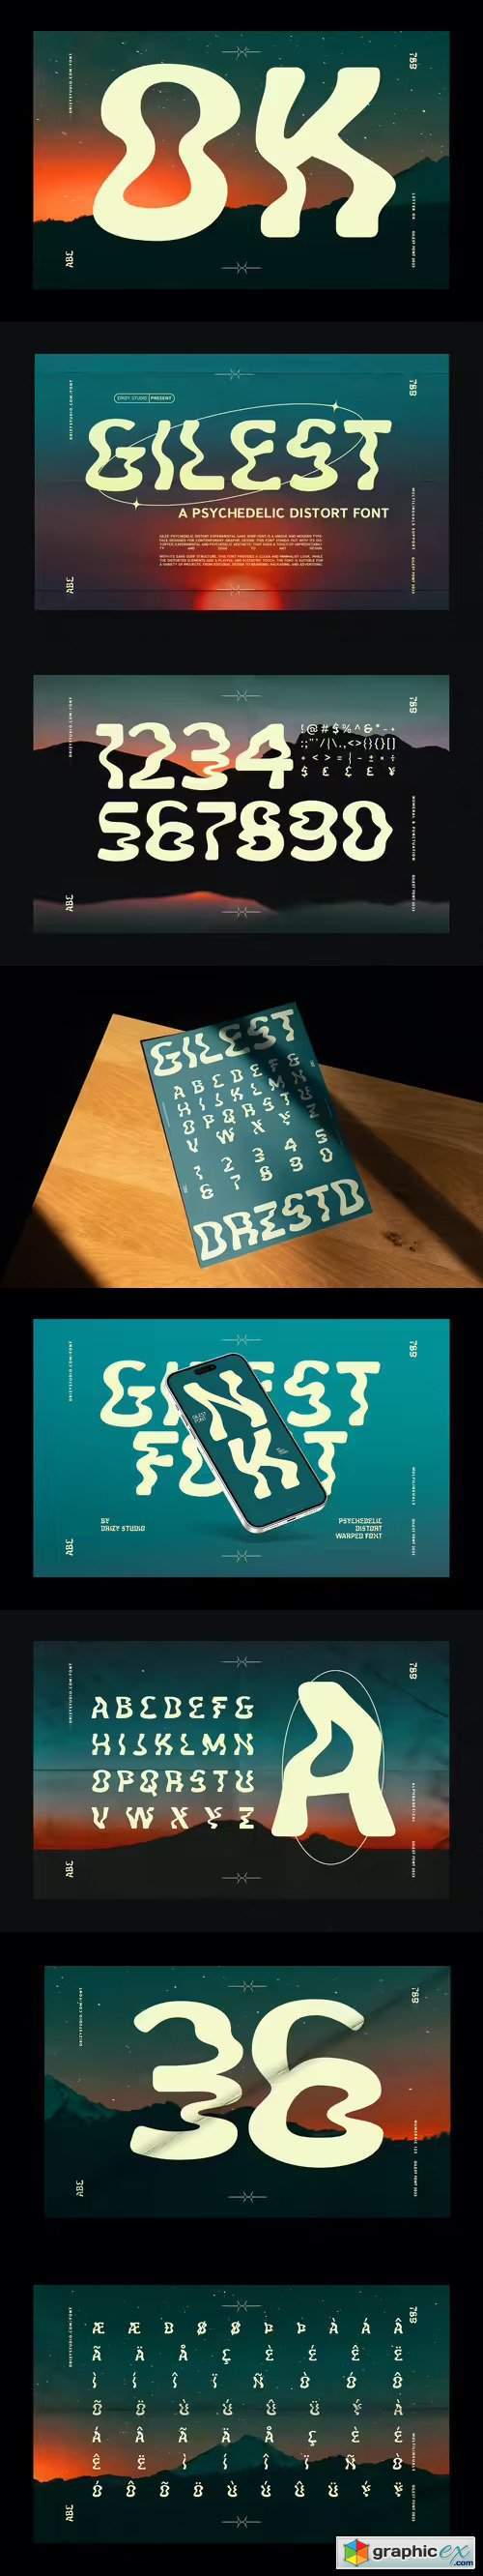 Gilest - A Psychedelic Distort Font